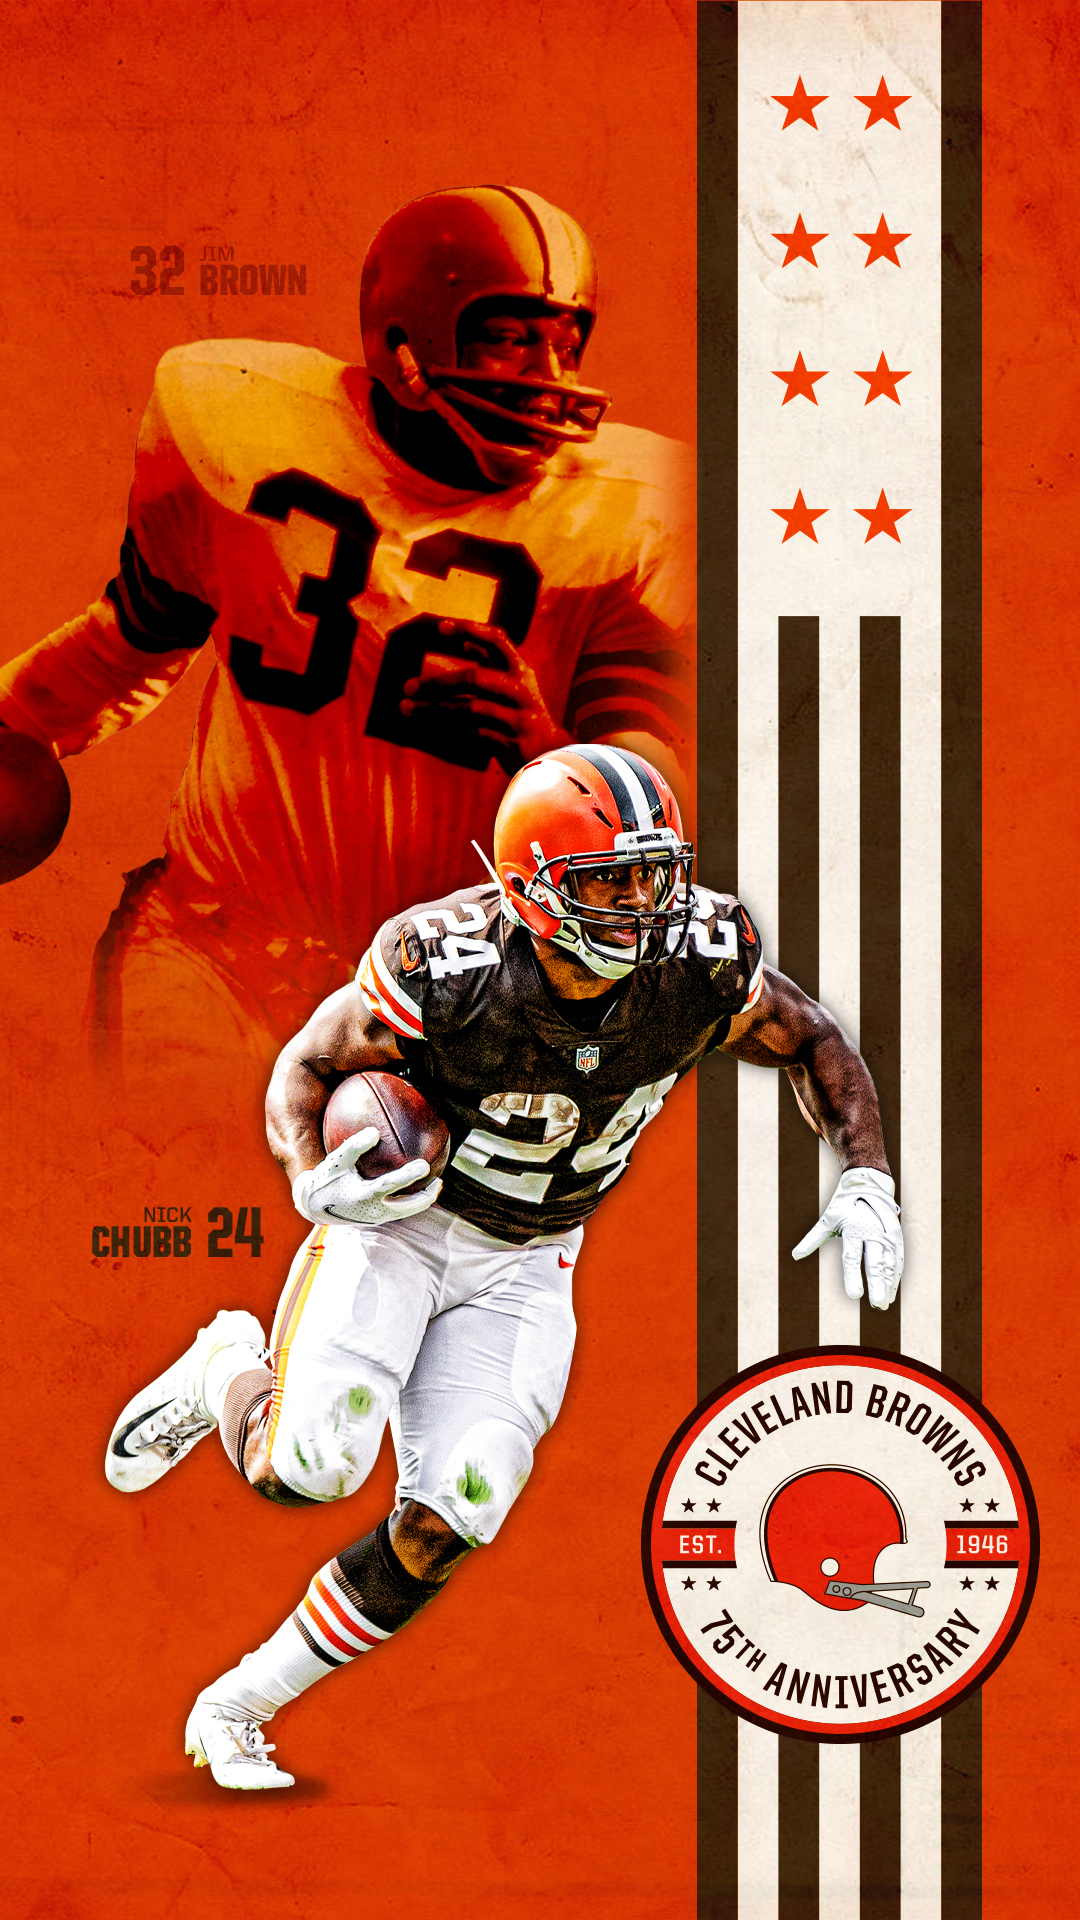 Cleveland Browns we're celebrating with our Browns Live 75th Anniversary celebration at 8 p.m